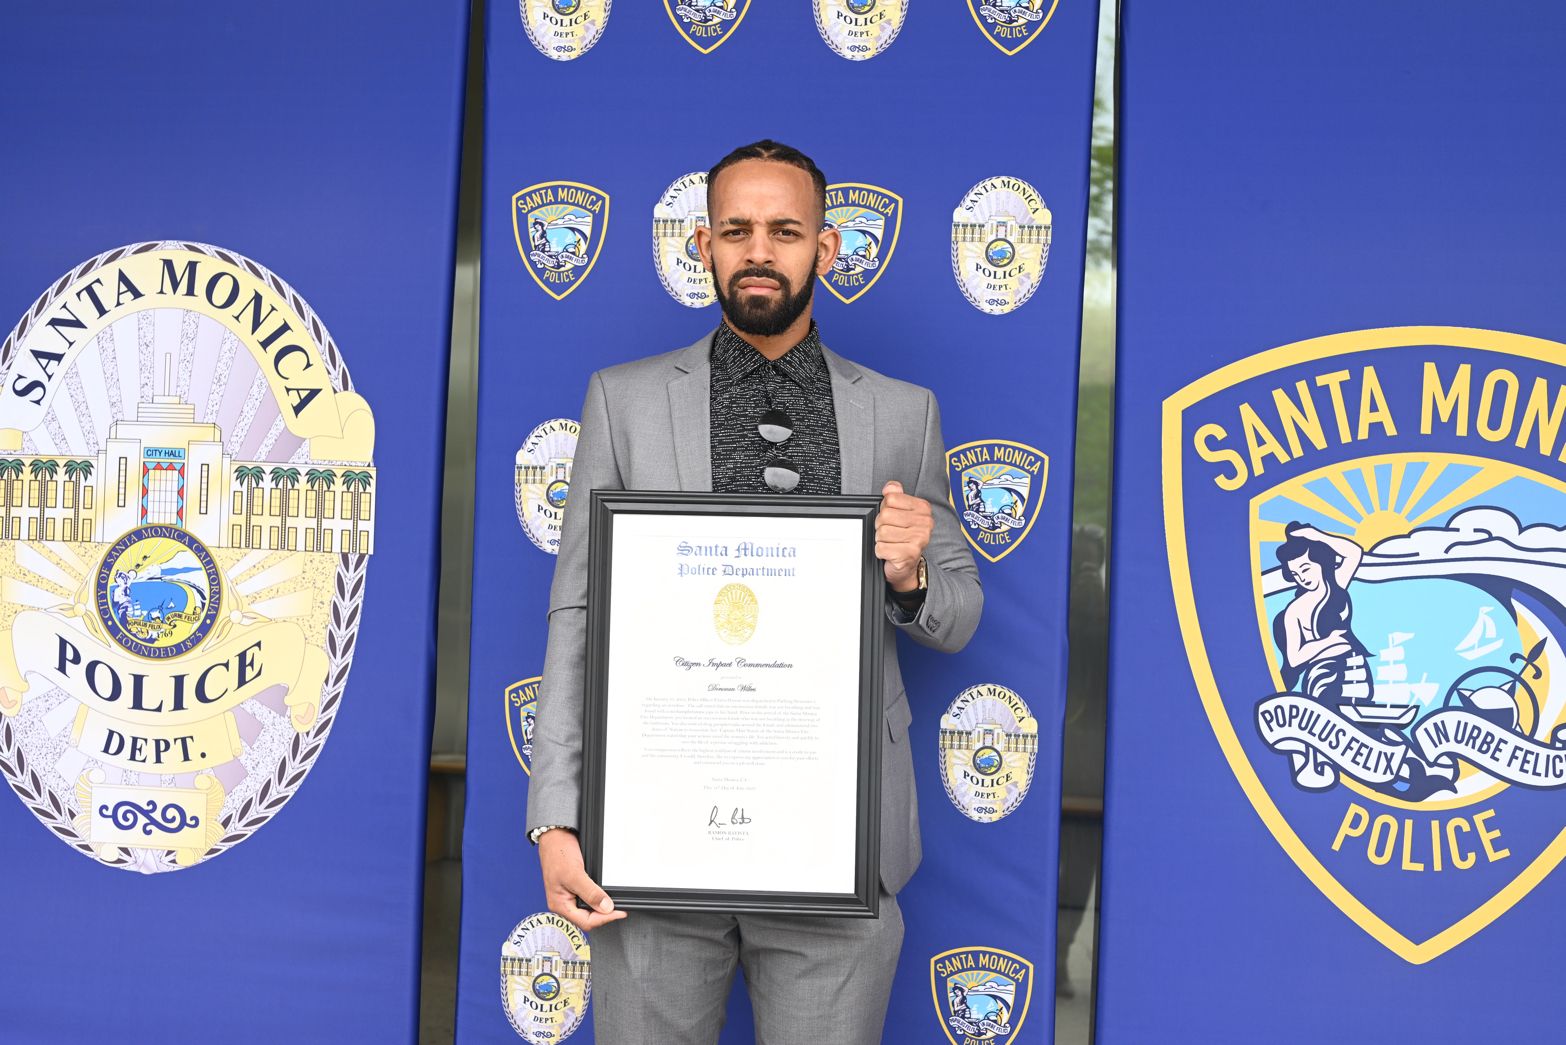 A man in a suit holds an award in front of a Santa Monica Police Department logo.